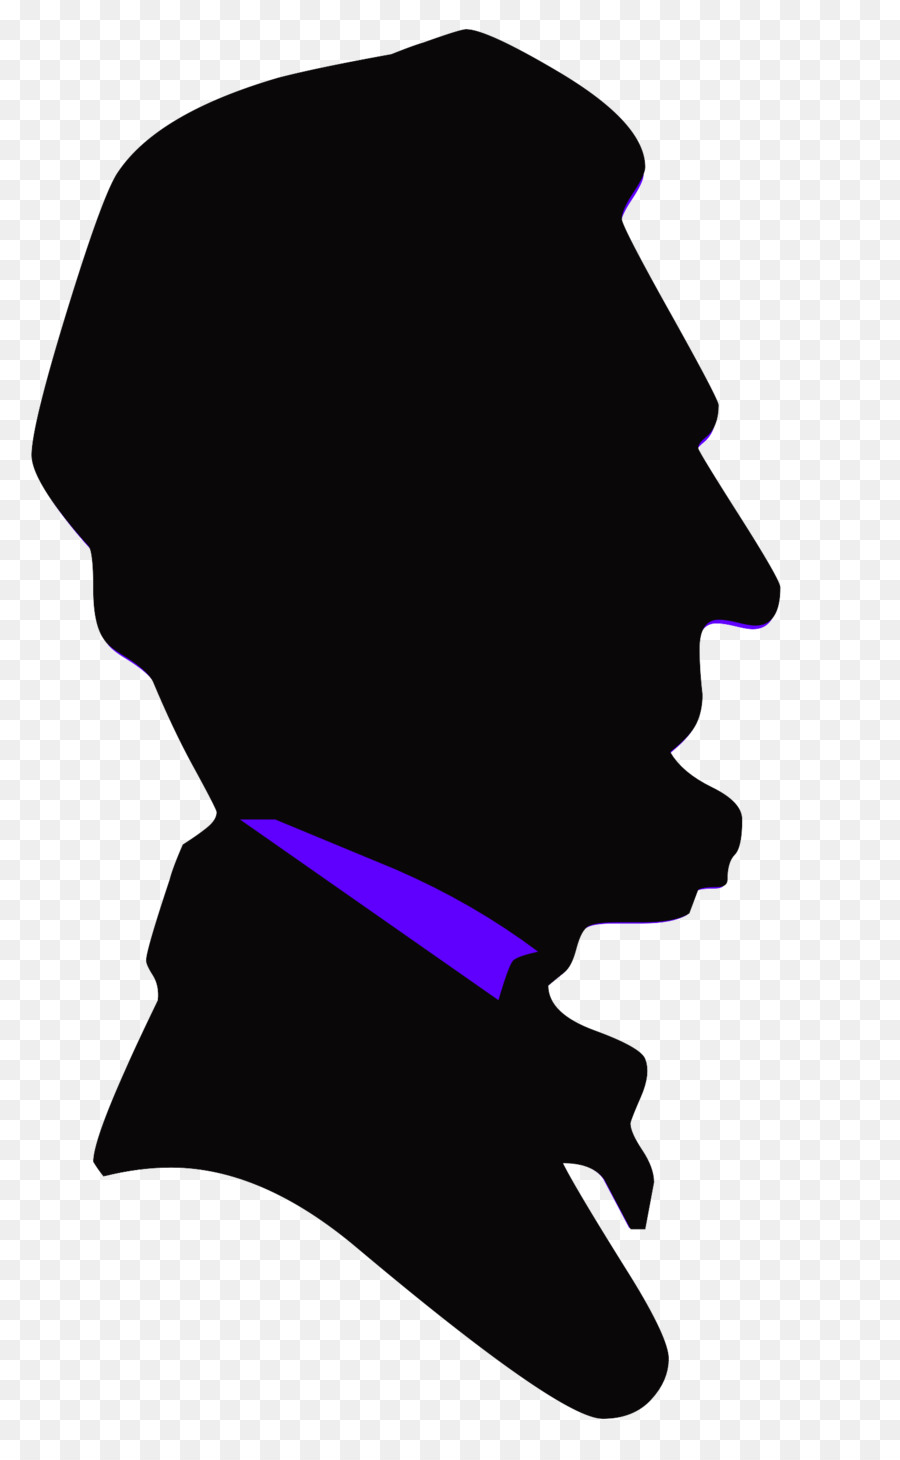 Lincoln Memorial Assassination of Abraham Lincoln Silhouette - avatar silhouettes png download - 1545*2485 - Free Transparent Lincoln Memorial png Download.